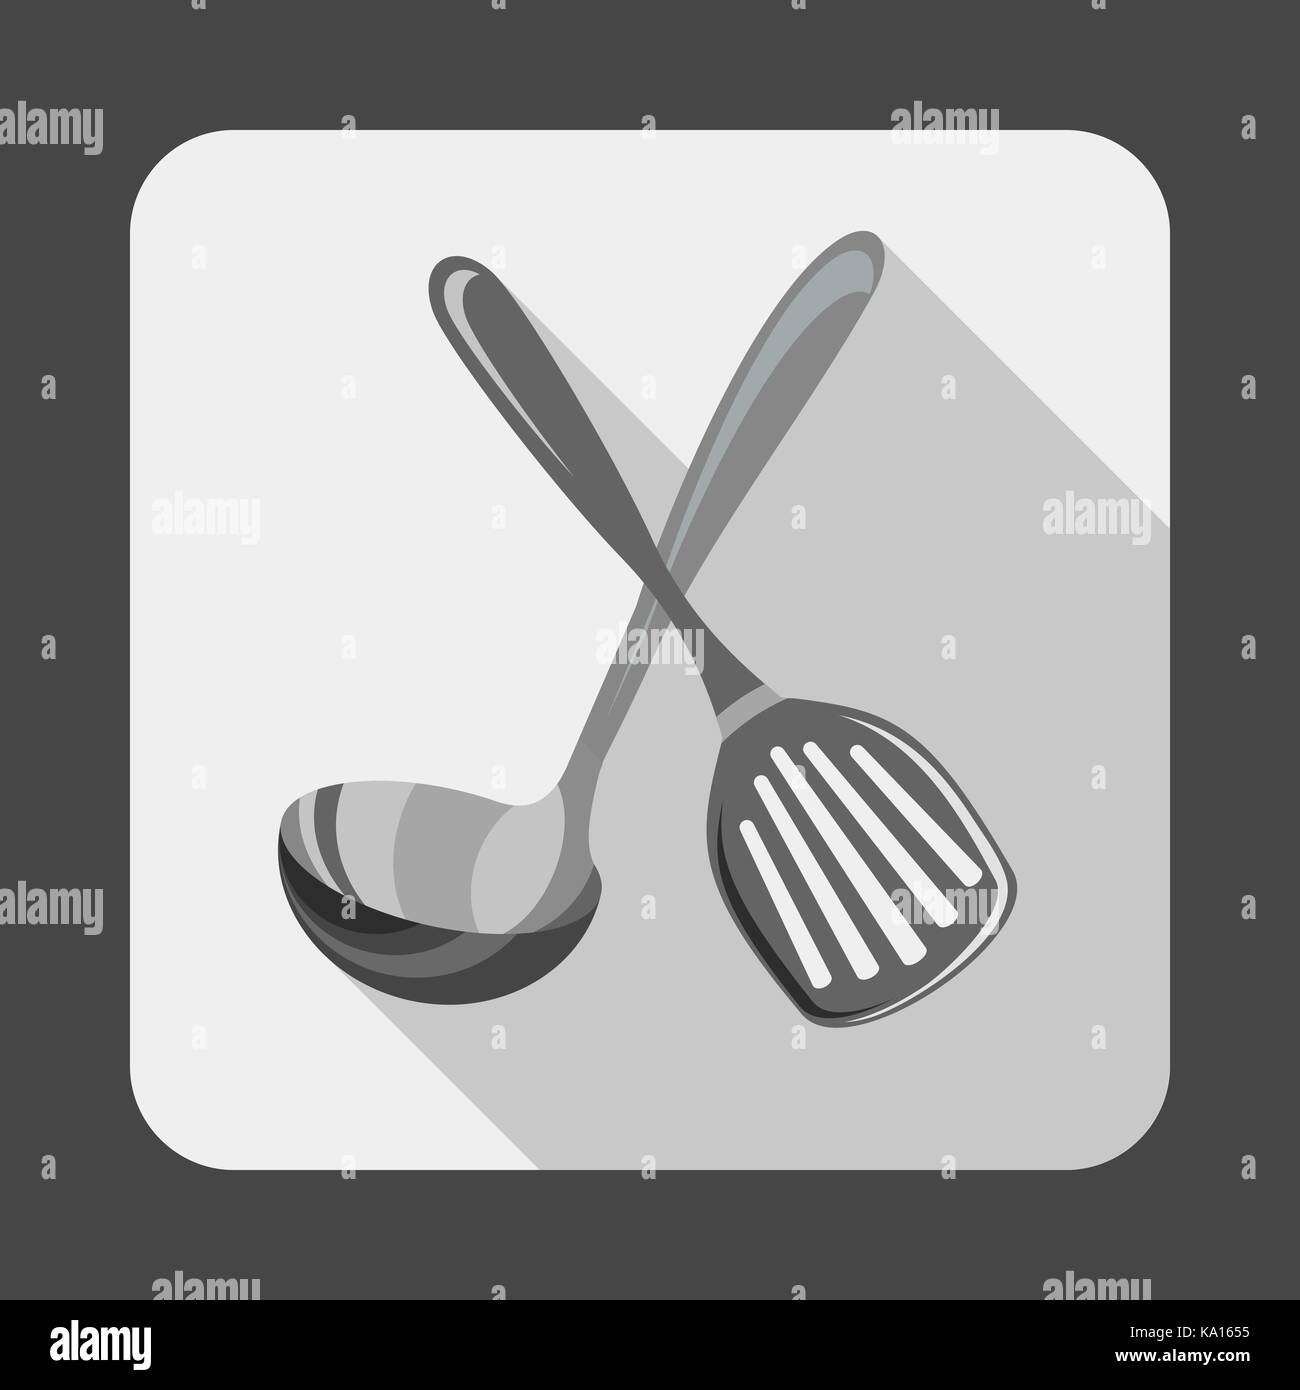 Kitchen tools concept background, cartoon style Stock Vector